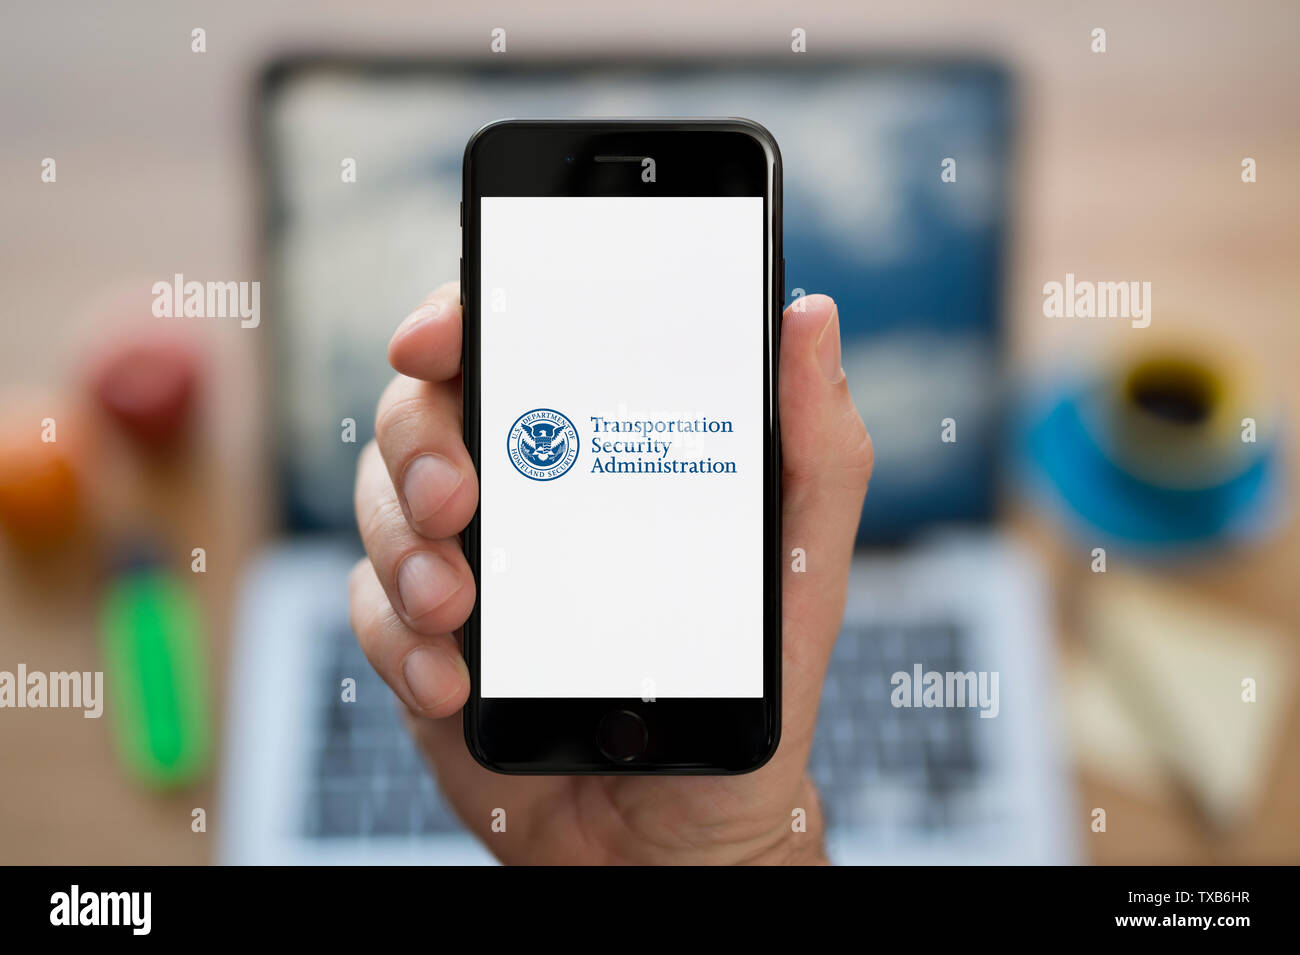 A man looks at his iPhone which displays the Transportation Security Administration (TSA) logo (Editorial use only). Stock Photo